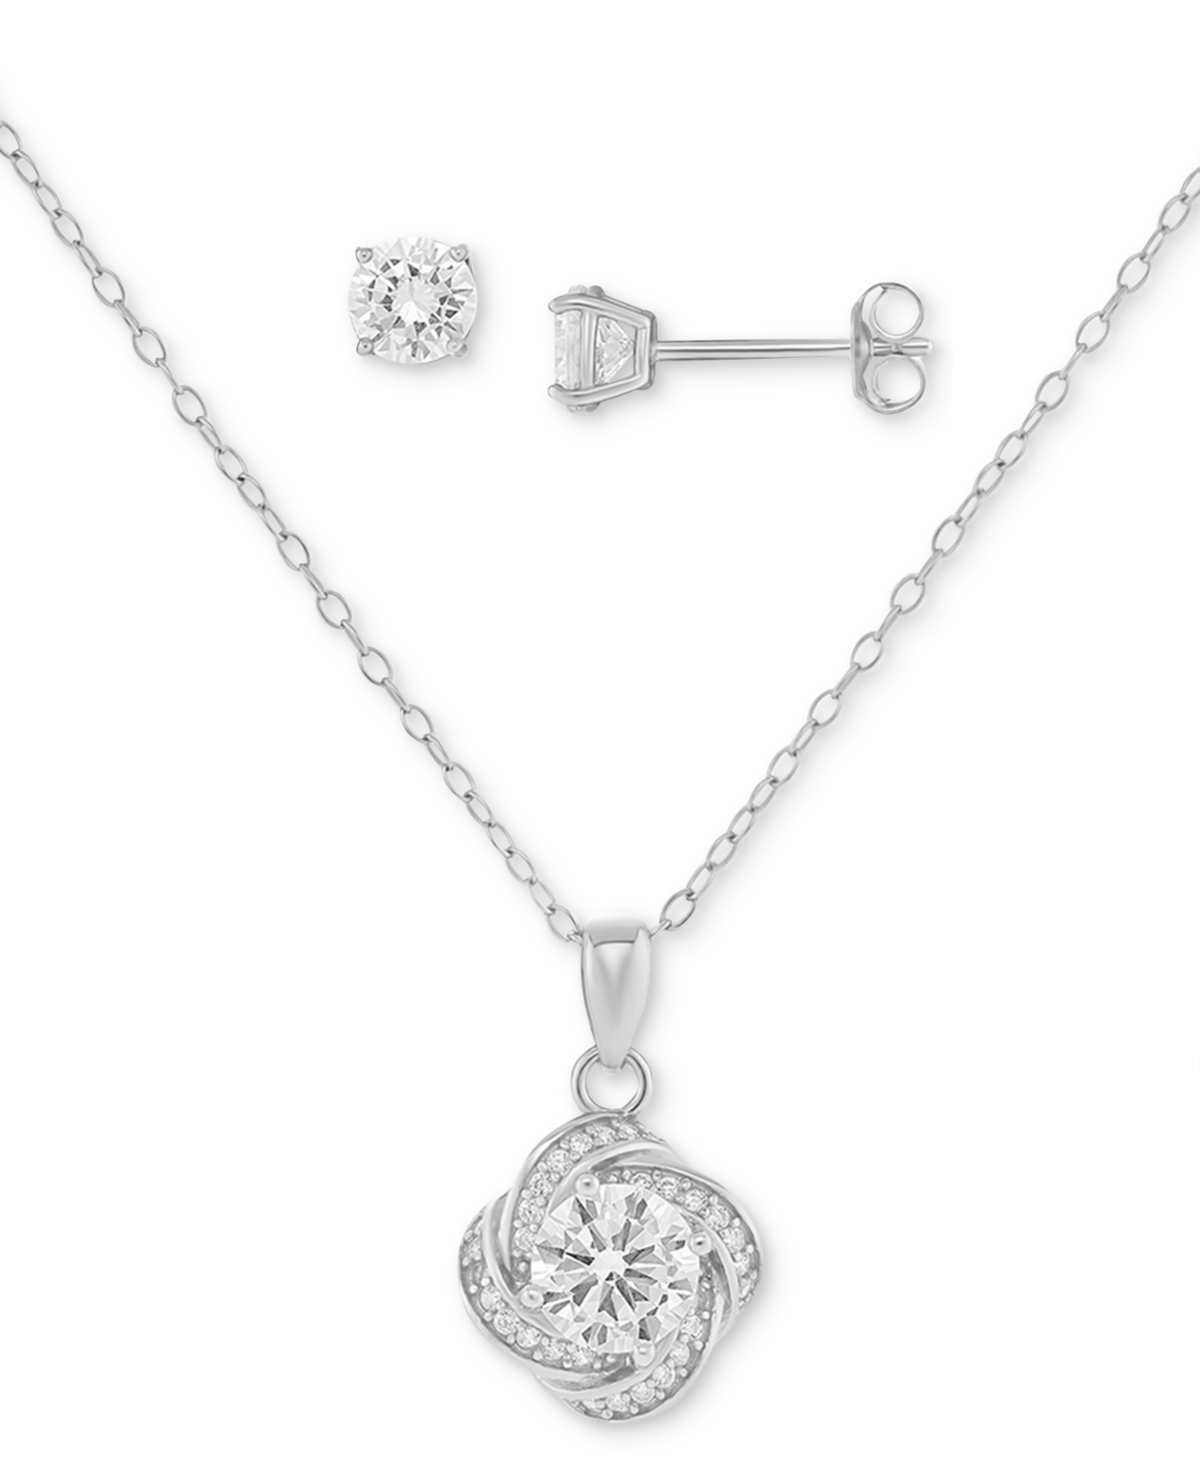 2-Pc. Set Cubic Zirconia Love Knot Pendant Necklace & Solitaire Stud Earrings in Sterling Silver, Created for Macy's - Sterling Silver